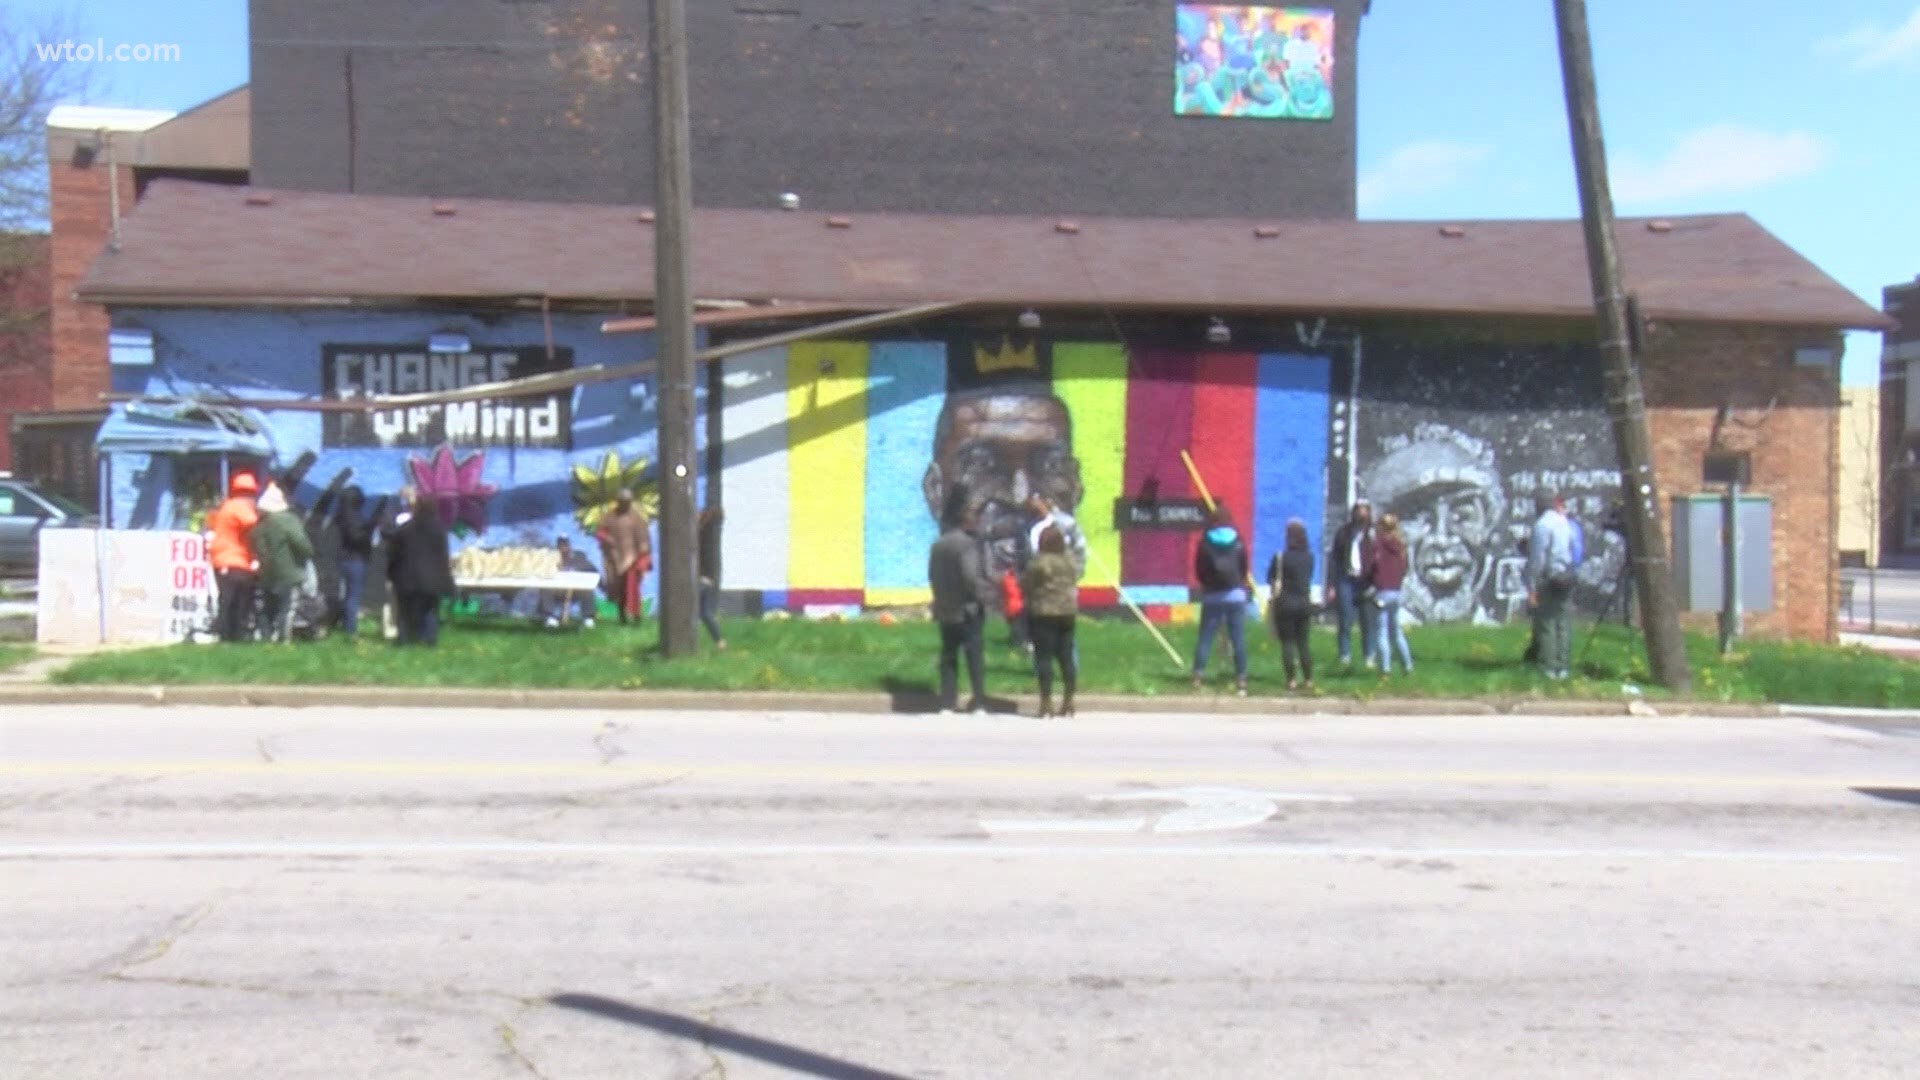 People gathered at the George Floyd street mural in north Toledo to honor him and talk about where the movement for police accountability and reform goes from here.